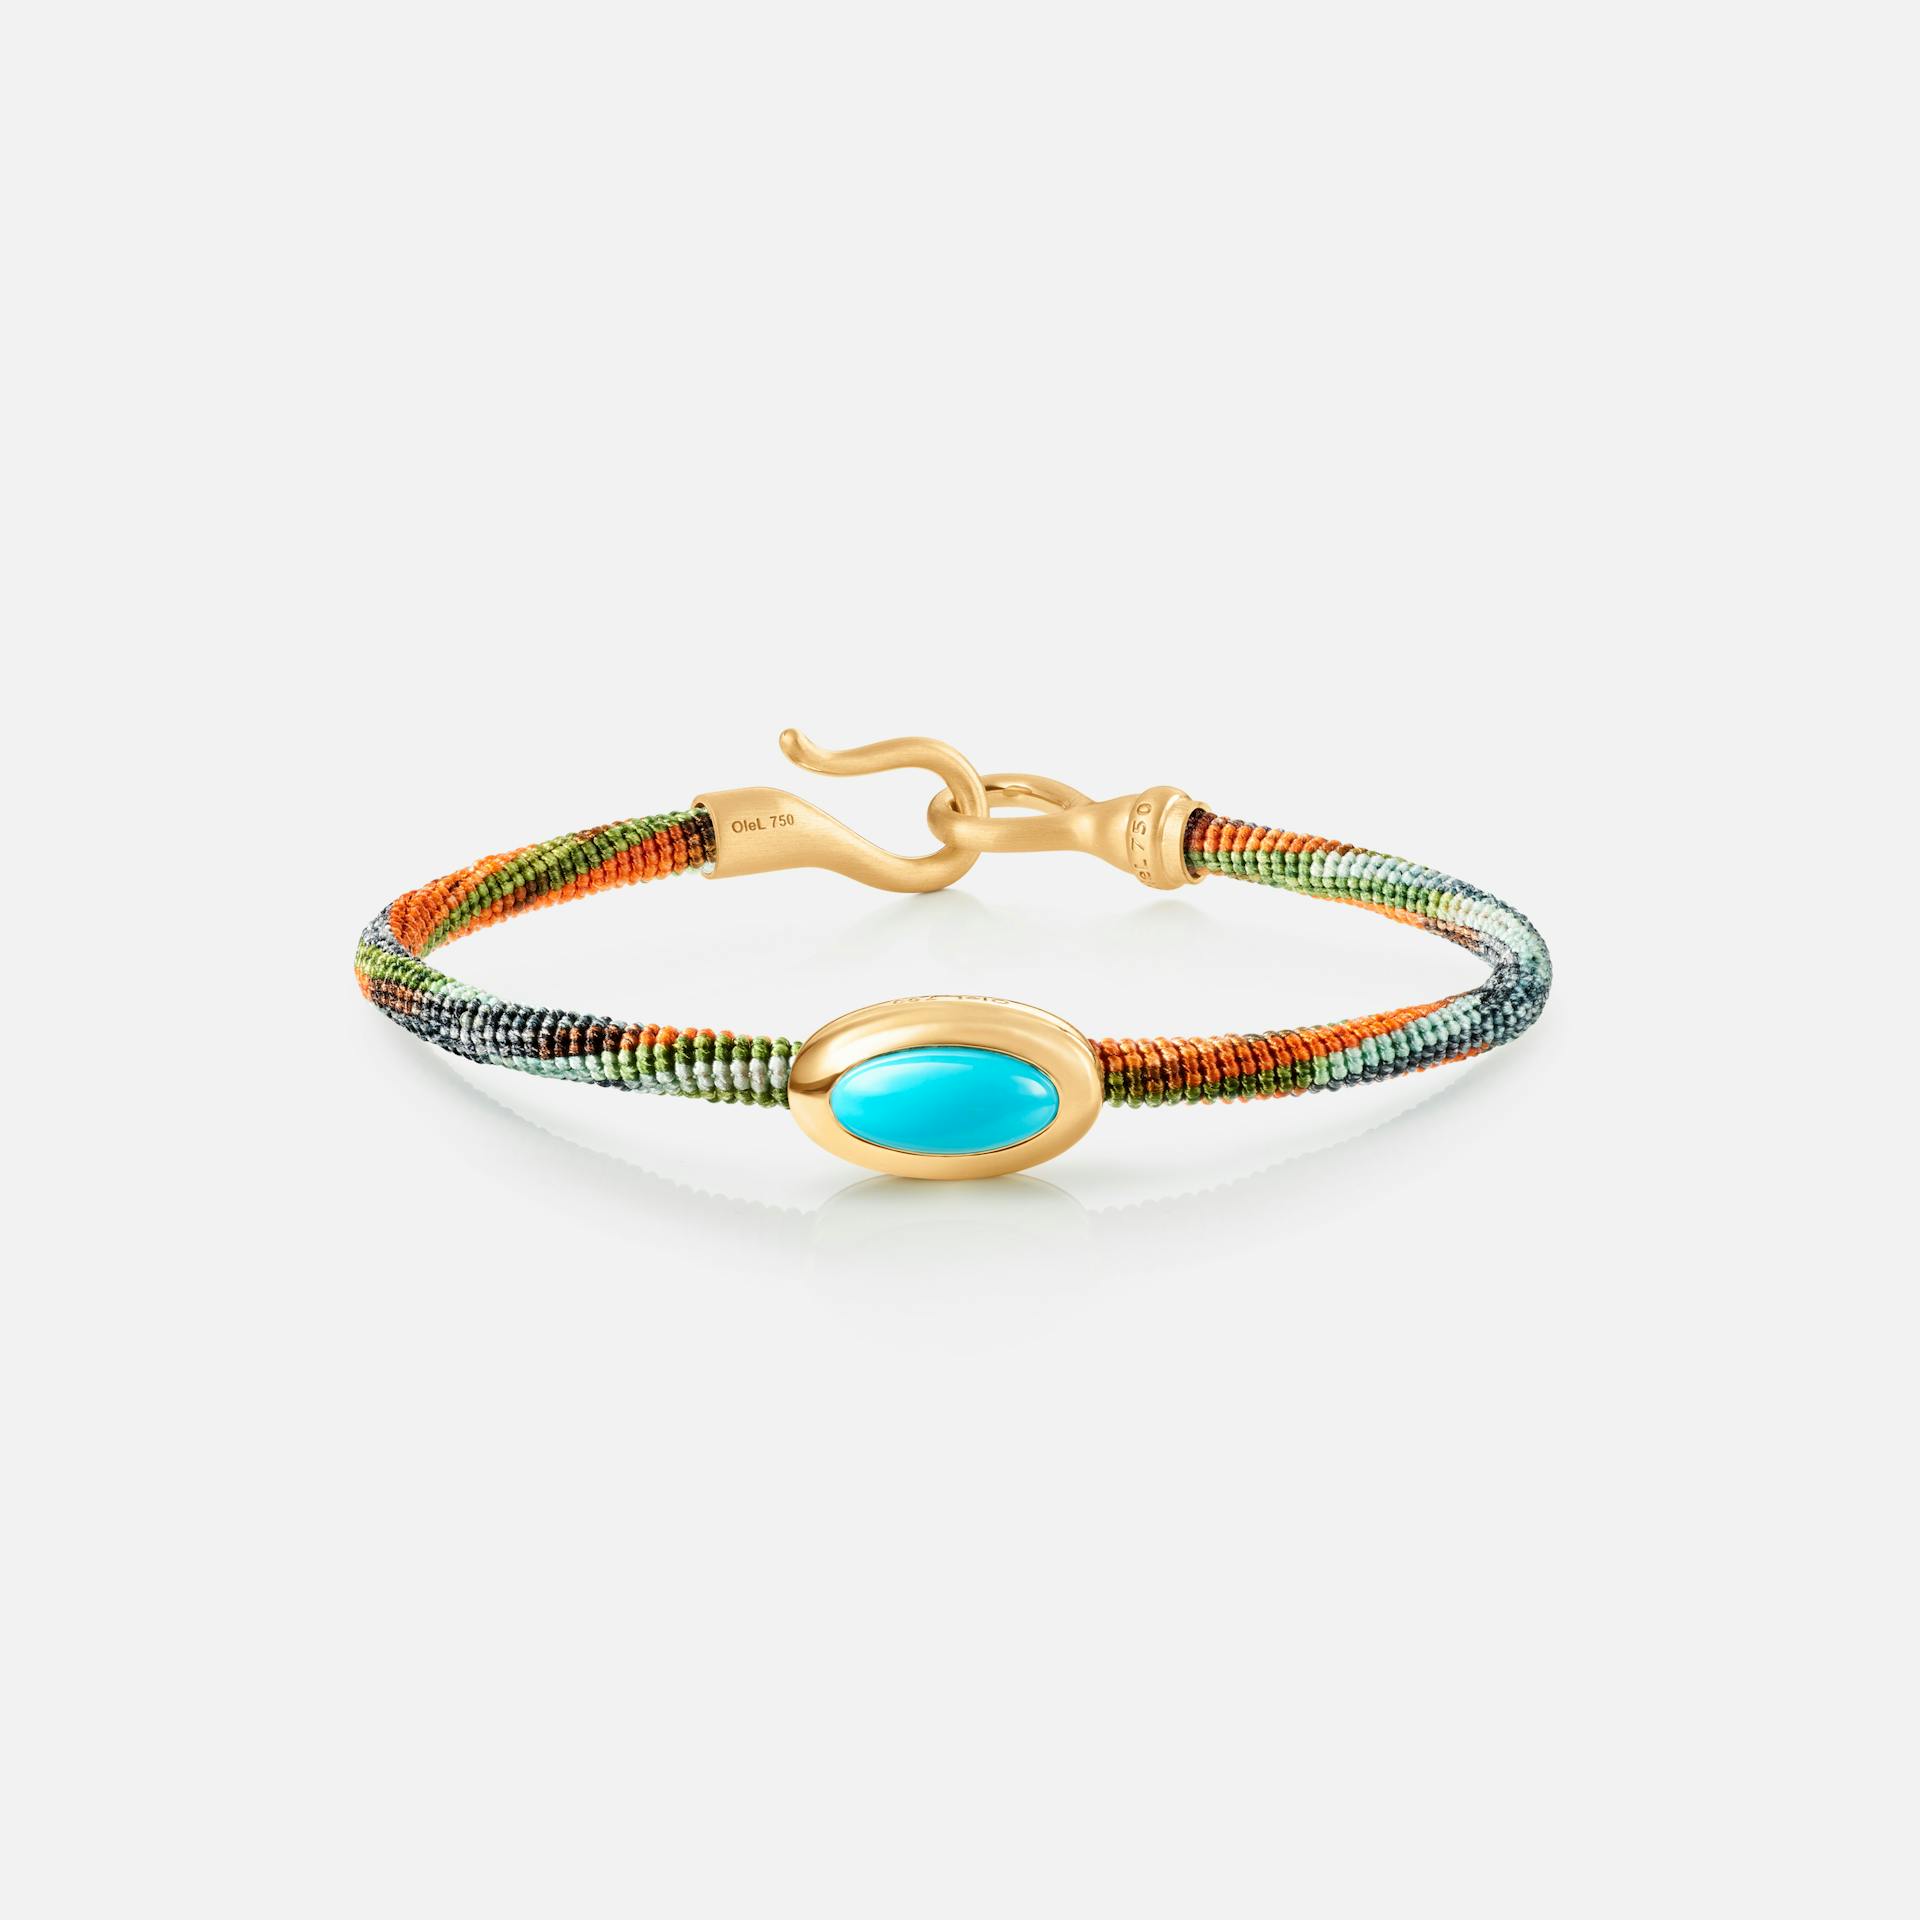 Life Bracelet with turquoise 4.5 mm